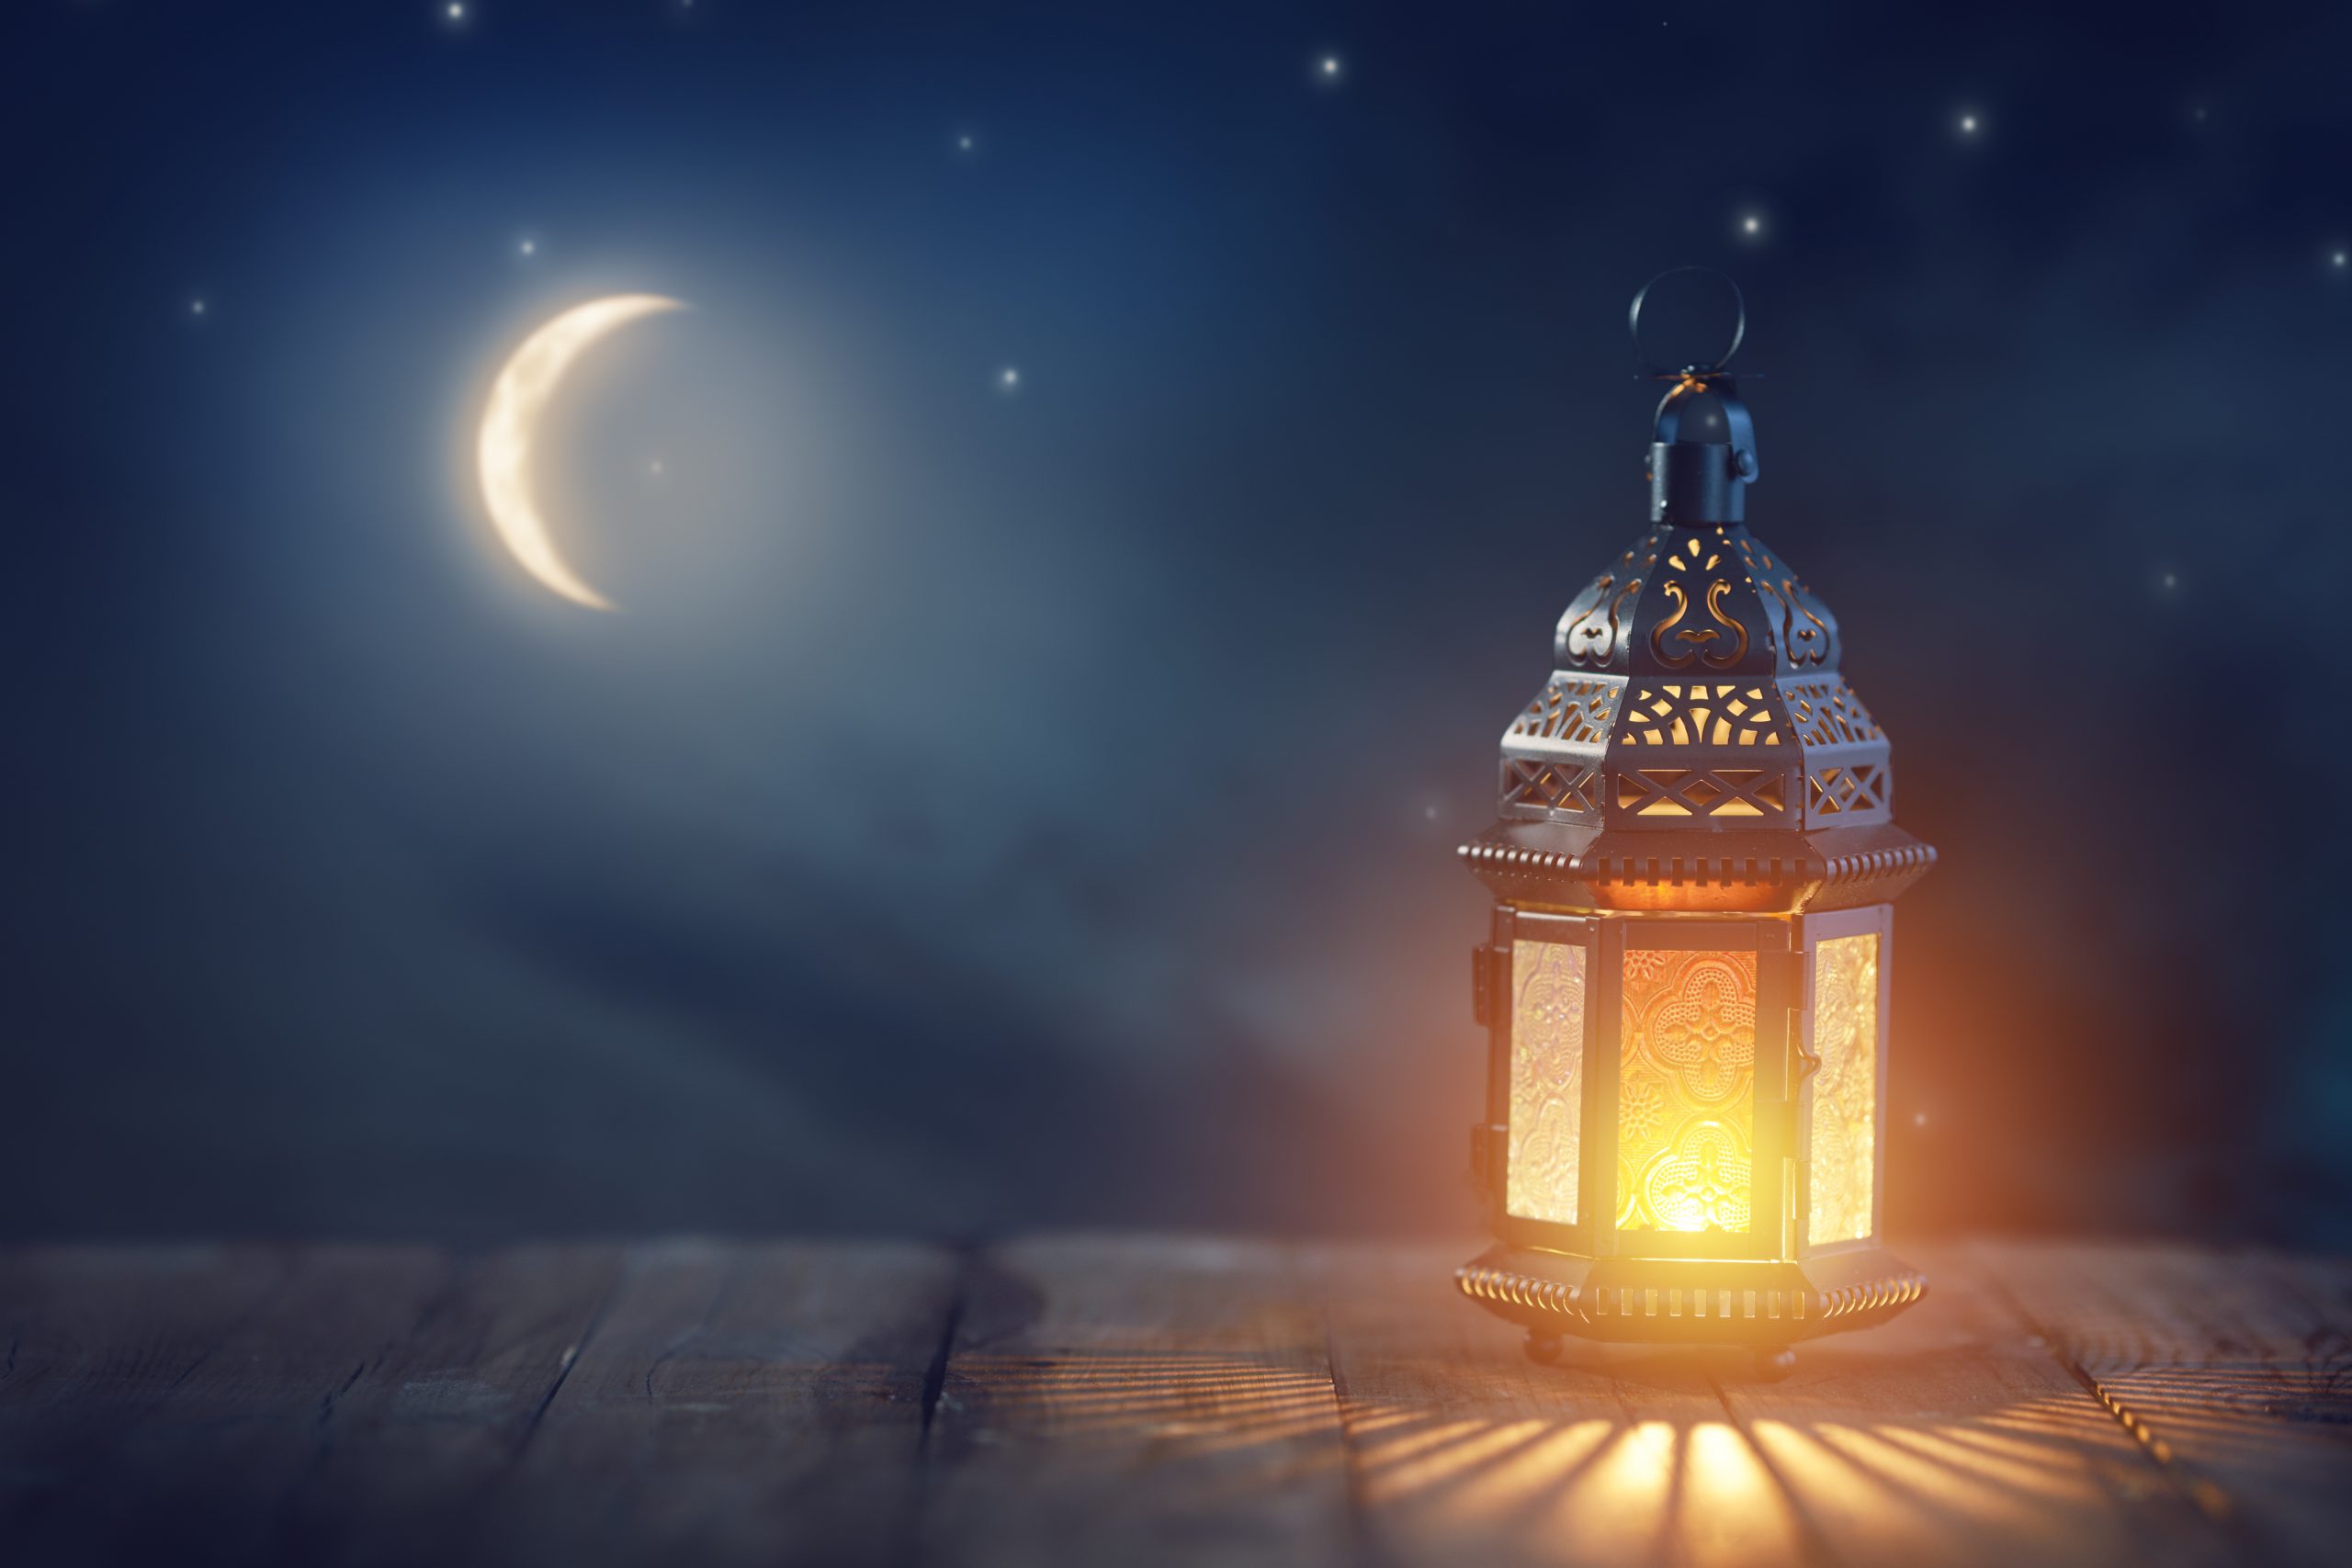 Ramadan Likely To Begin On April 14 Eid Al Fitr Likely On May 13 Expert The Filipino Times